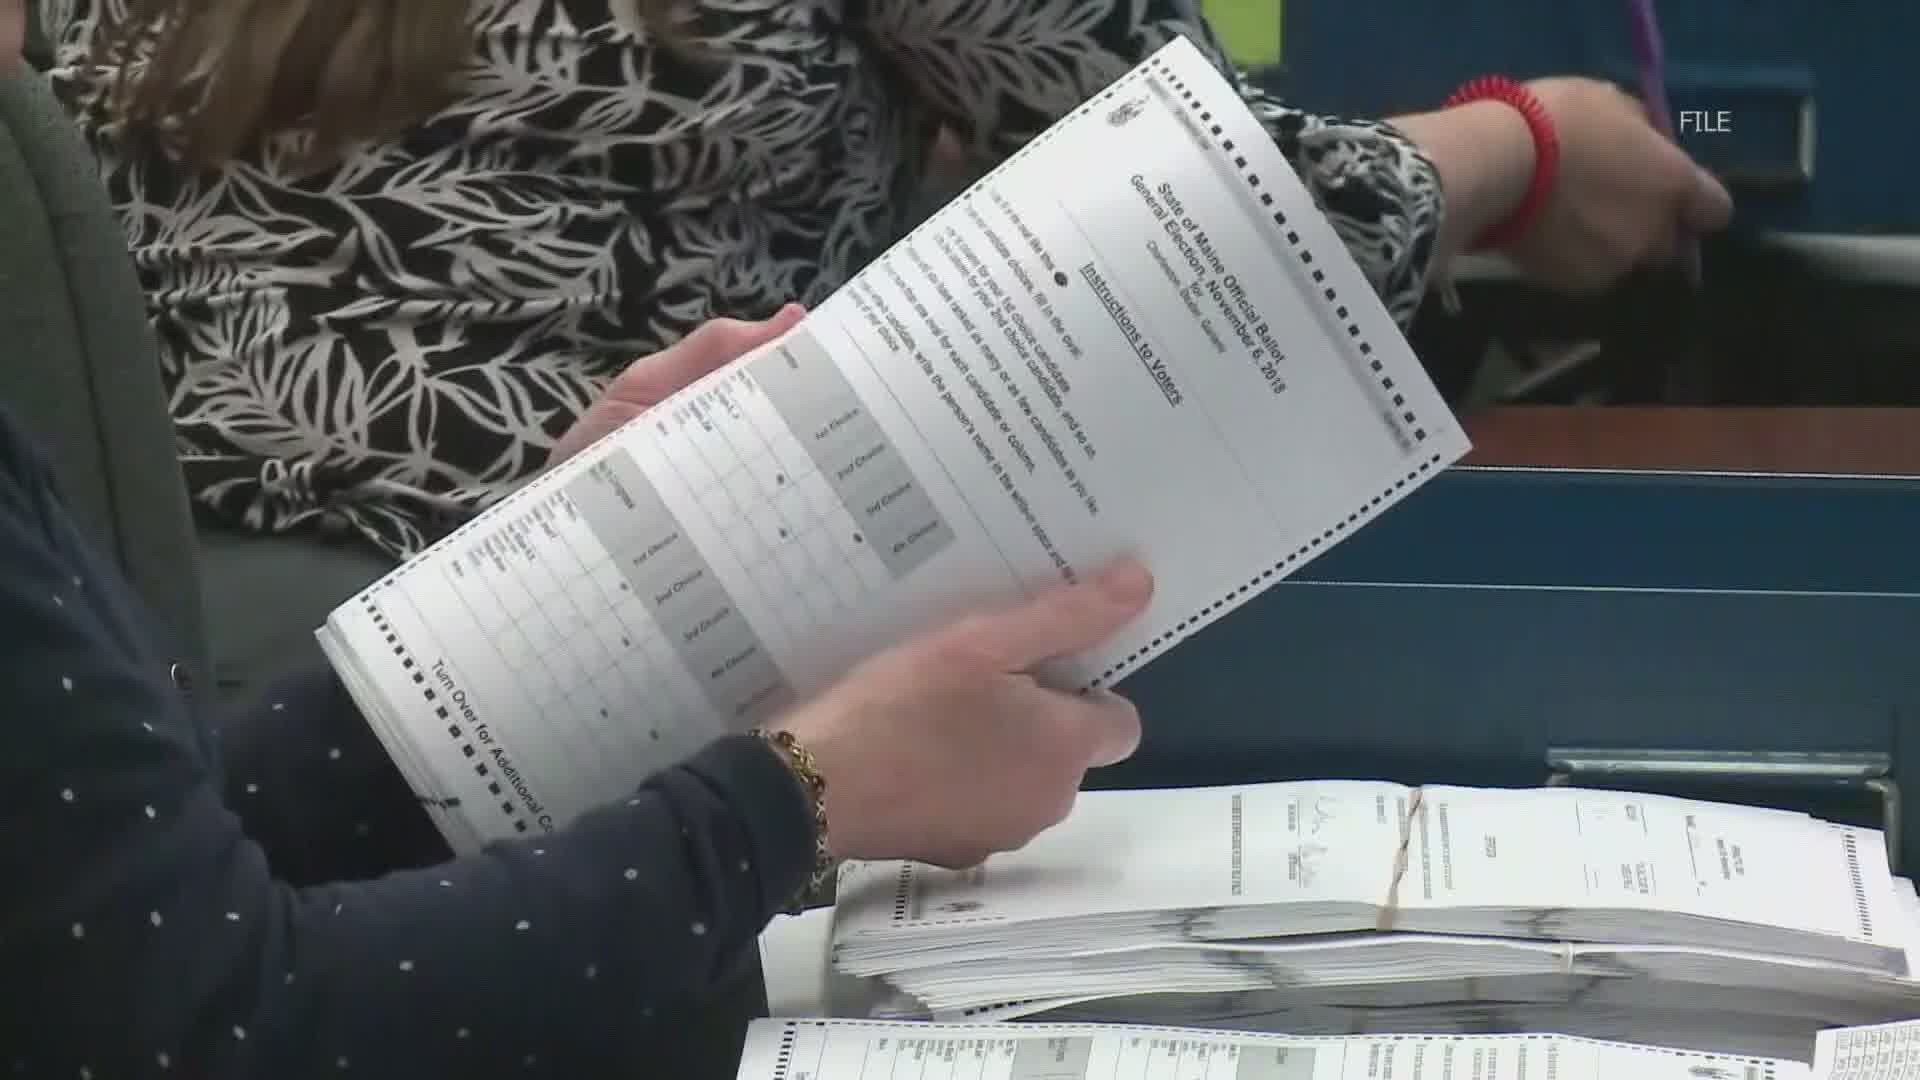 Absentee ballots secured in vaults, locked rooms until processing can begin